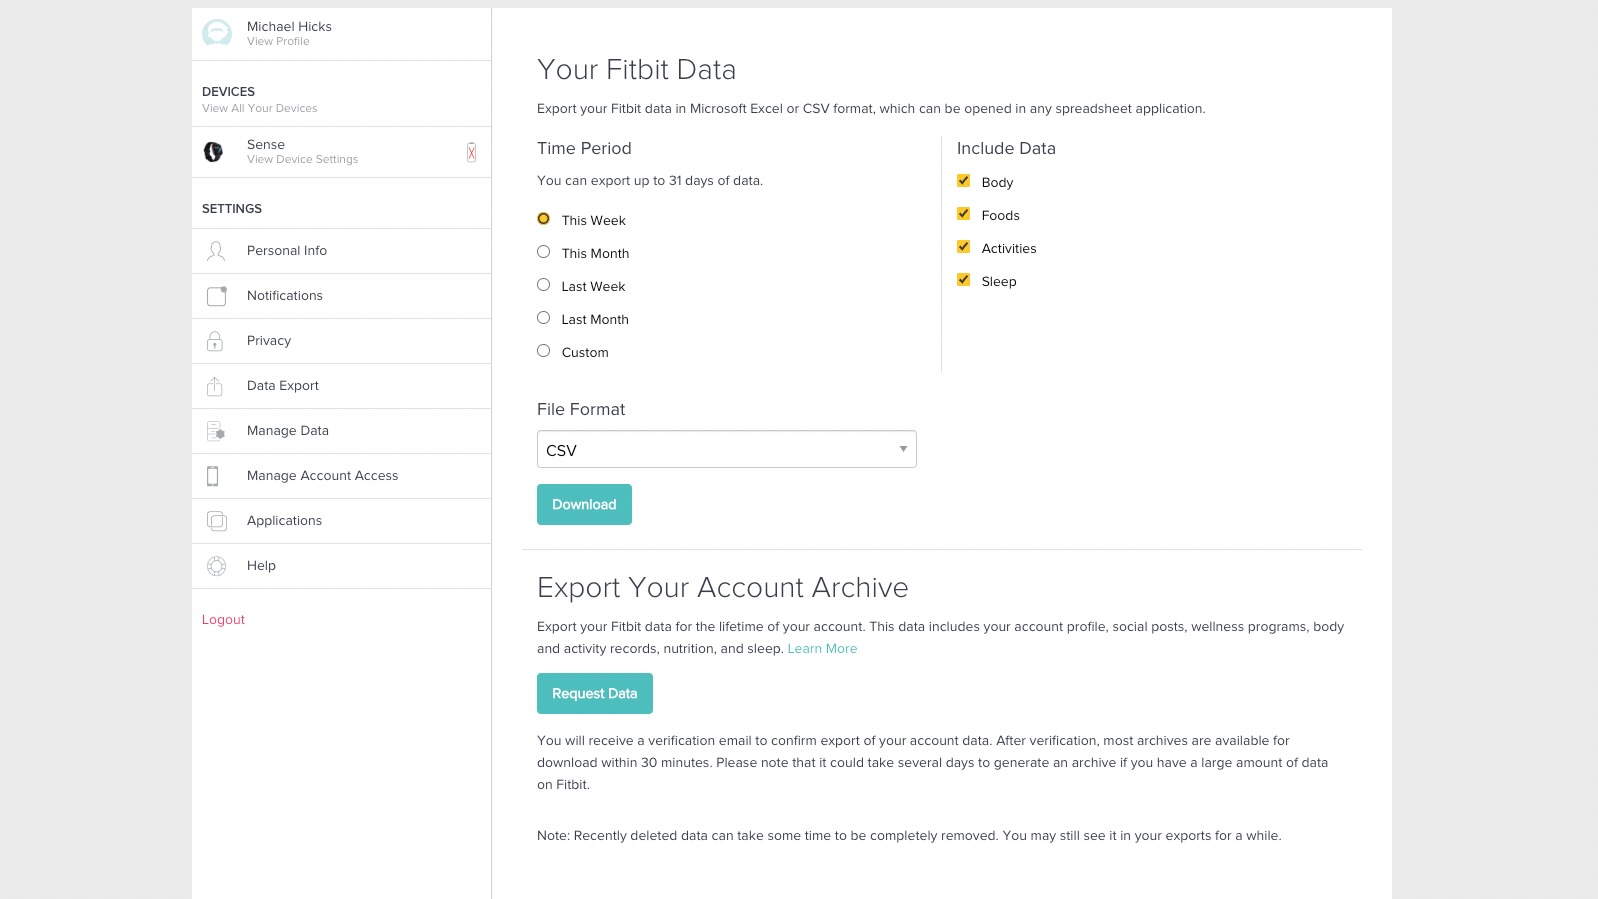 The Fitbit data export page with custom date options for exporting exercise and health history.